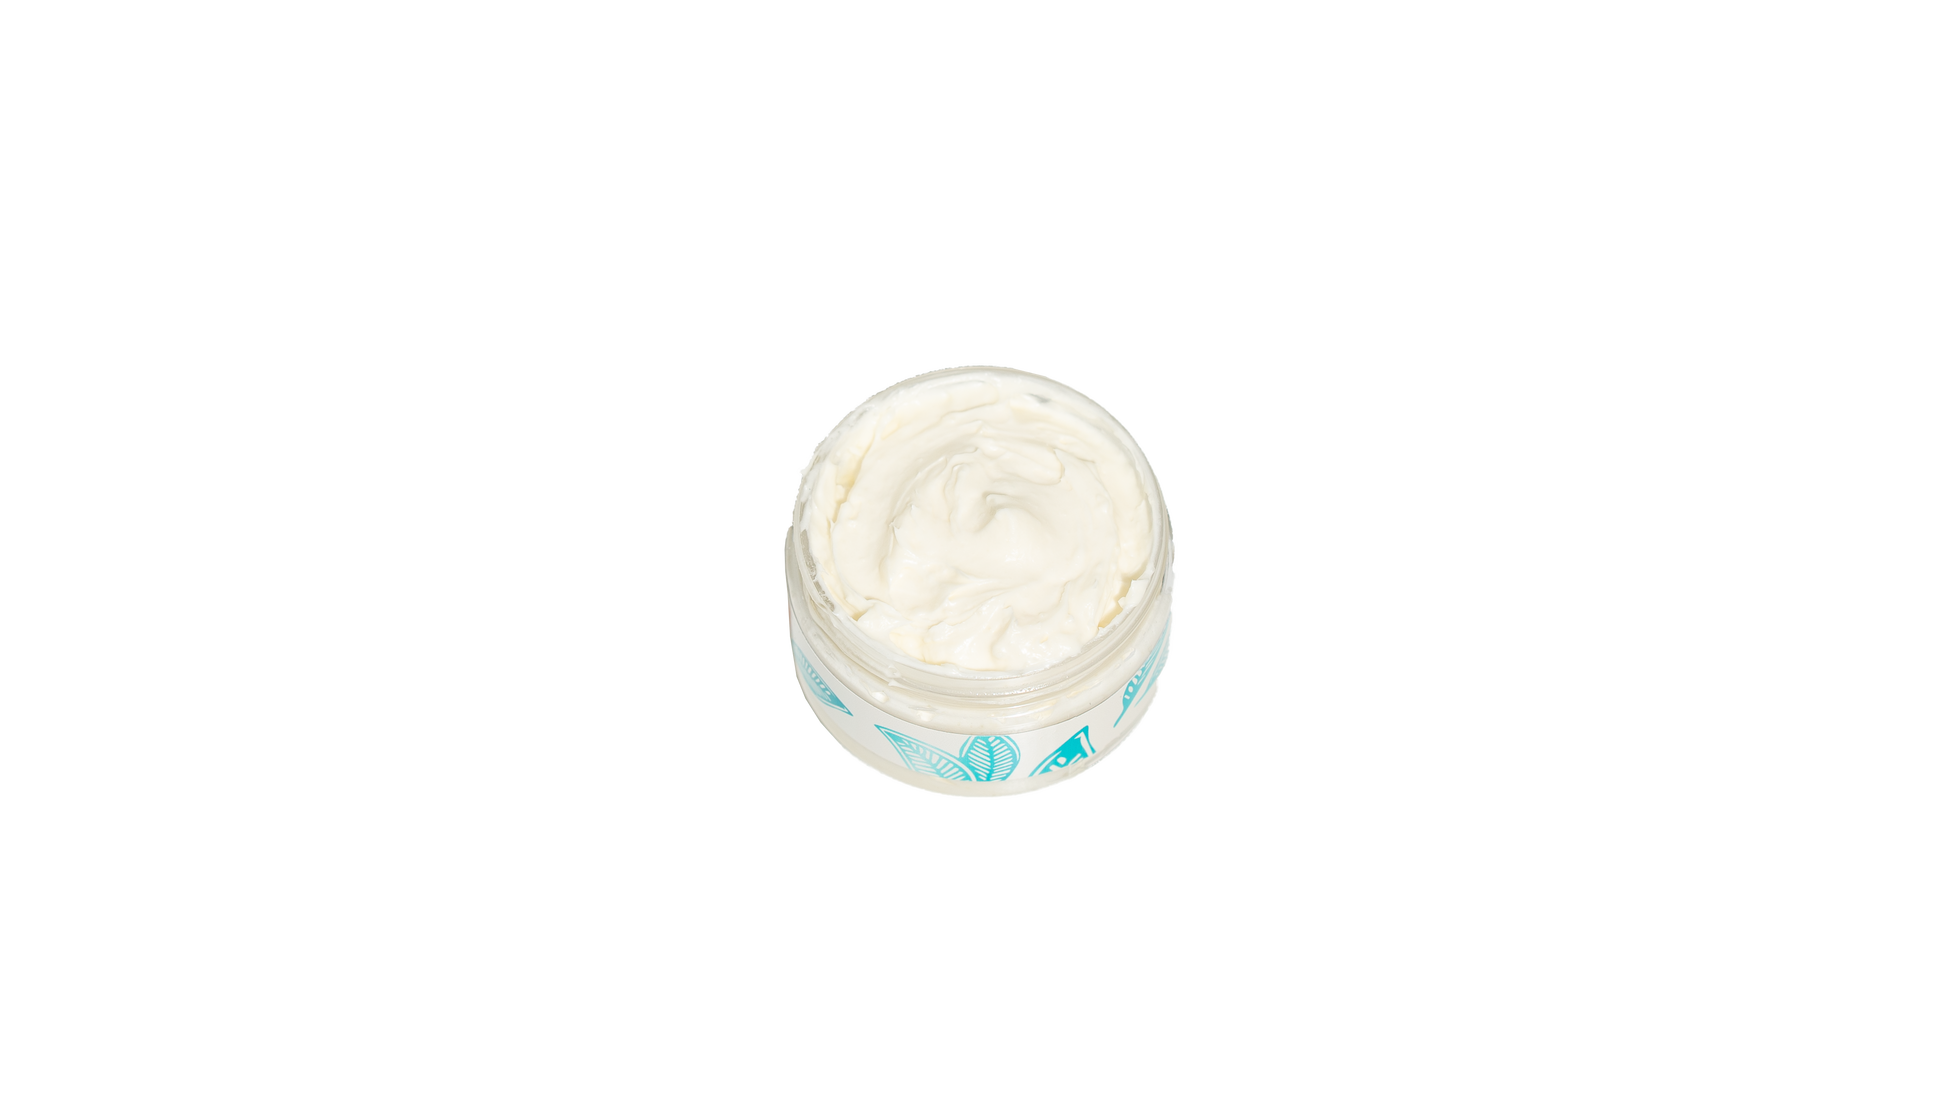  An open 4 oz. jar of Vanilla Chamomile body butter is visible from above against a transparent background, revealing its smooth, creamy texture.